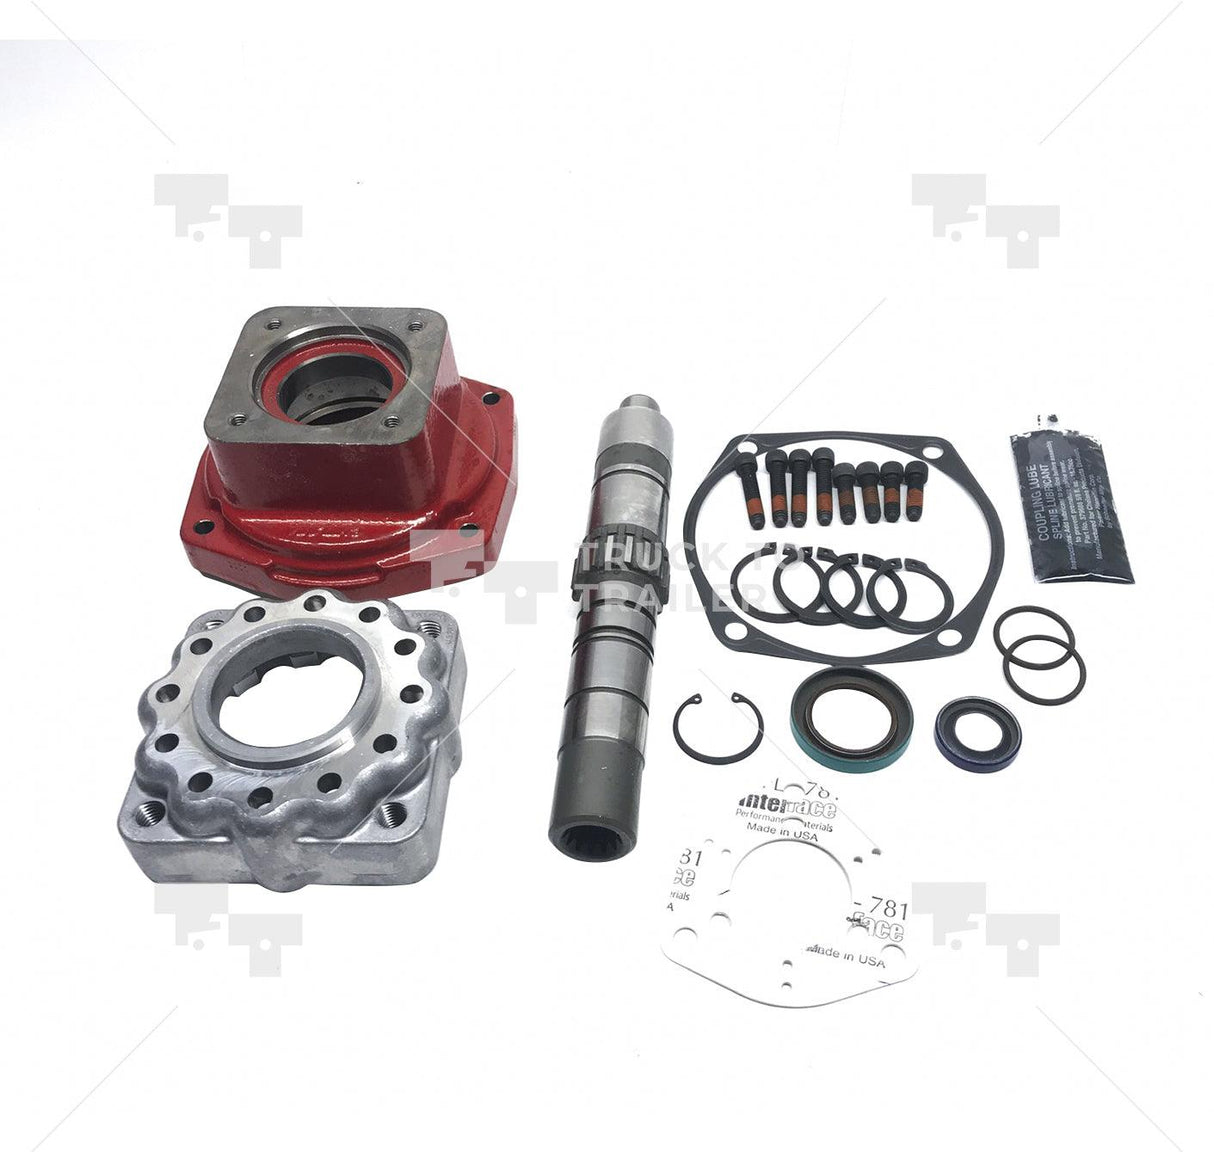 329160-38X Oem Parker Chelsea Power Take Off Pto Rotatable Flange Conversion Kit.